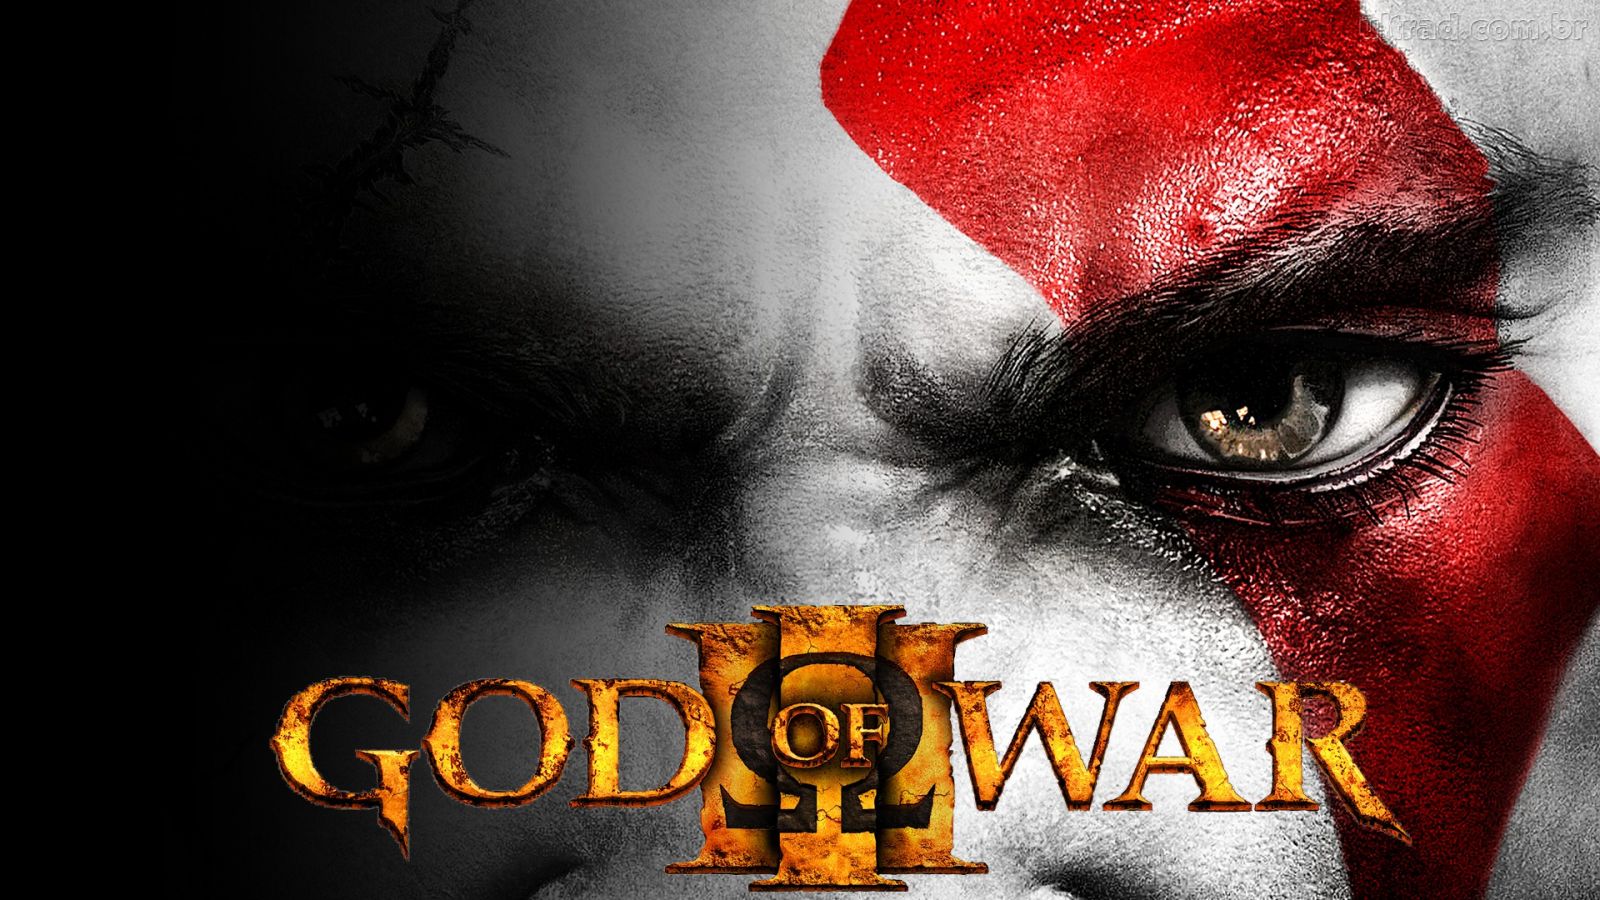 wallpaper god of war 3,movie,poster,fictional character,album cover,pc game